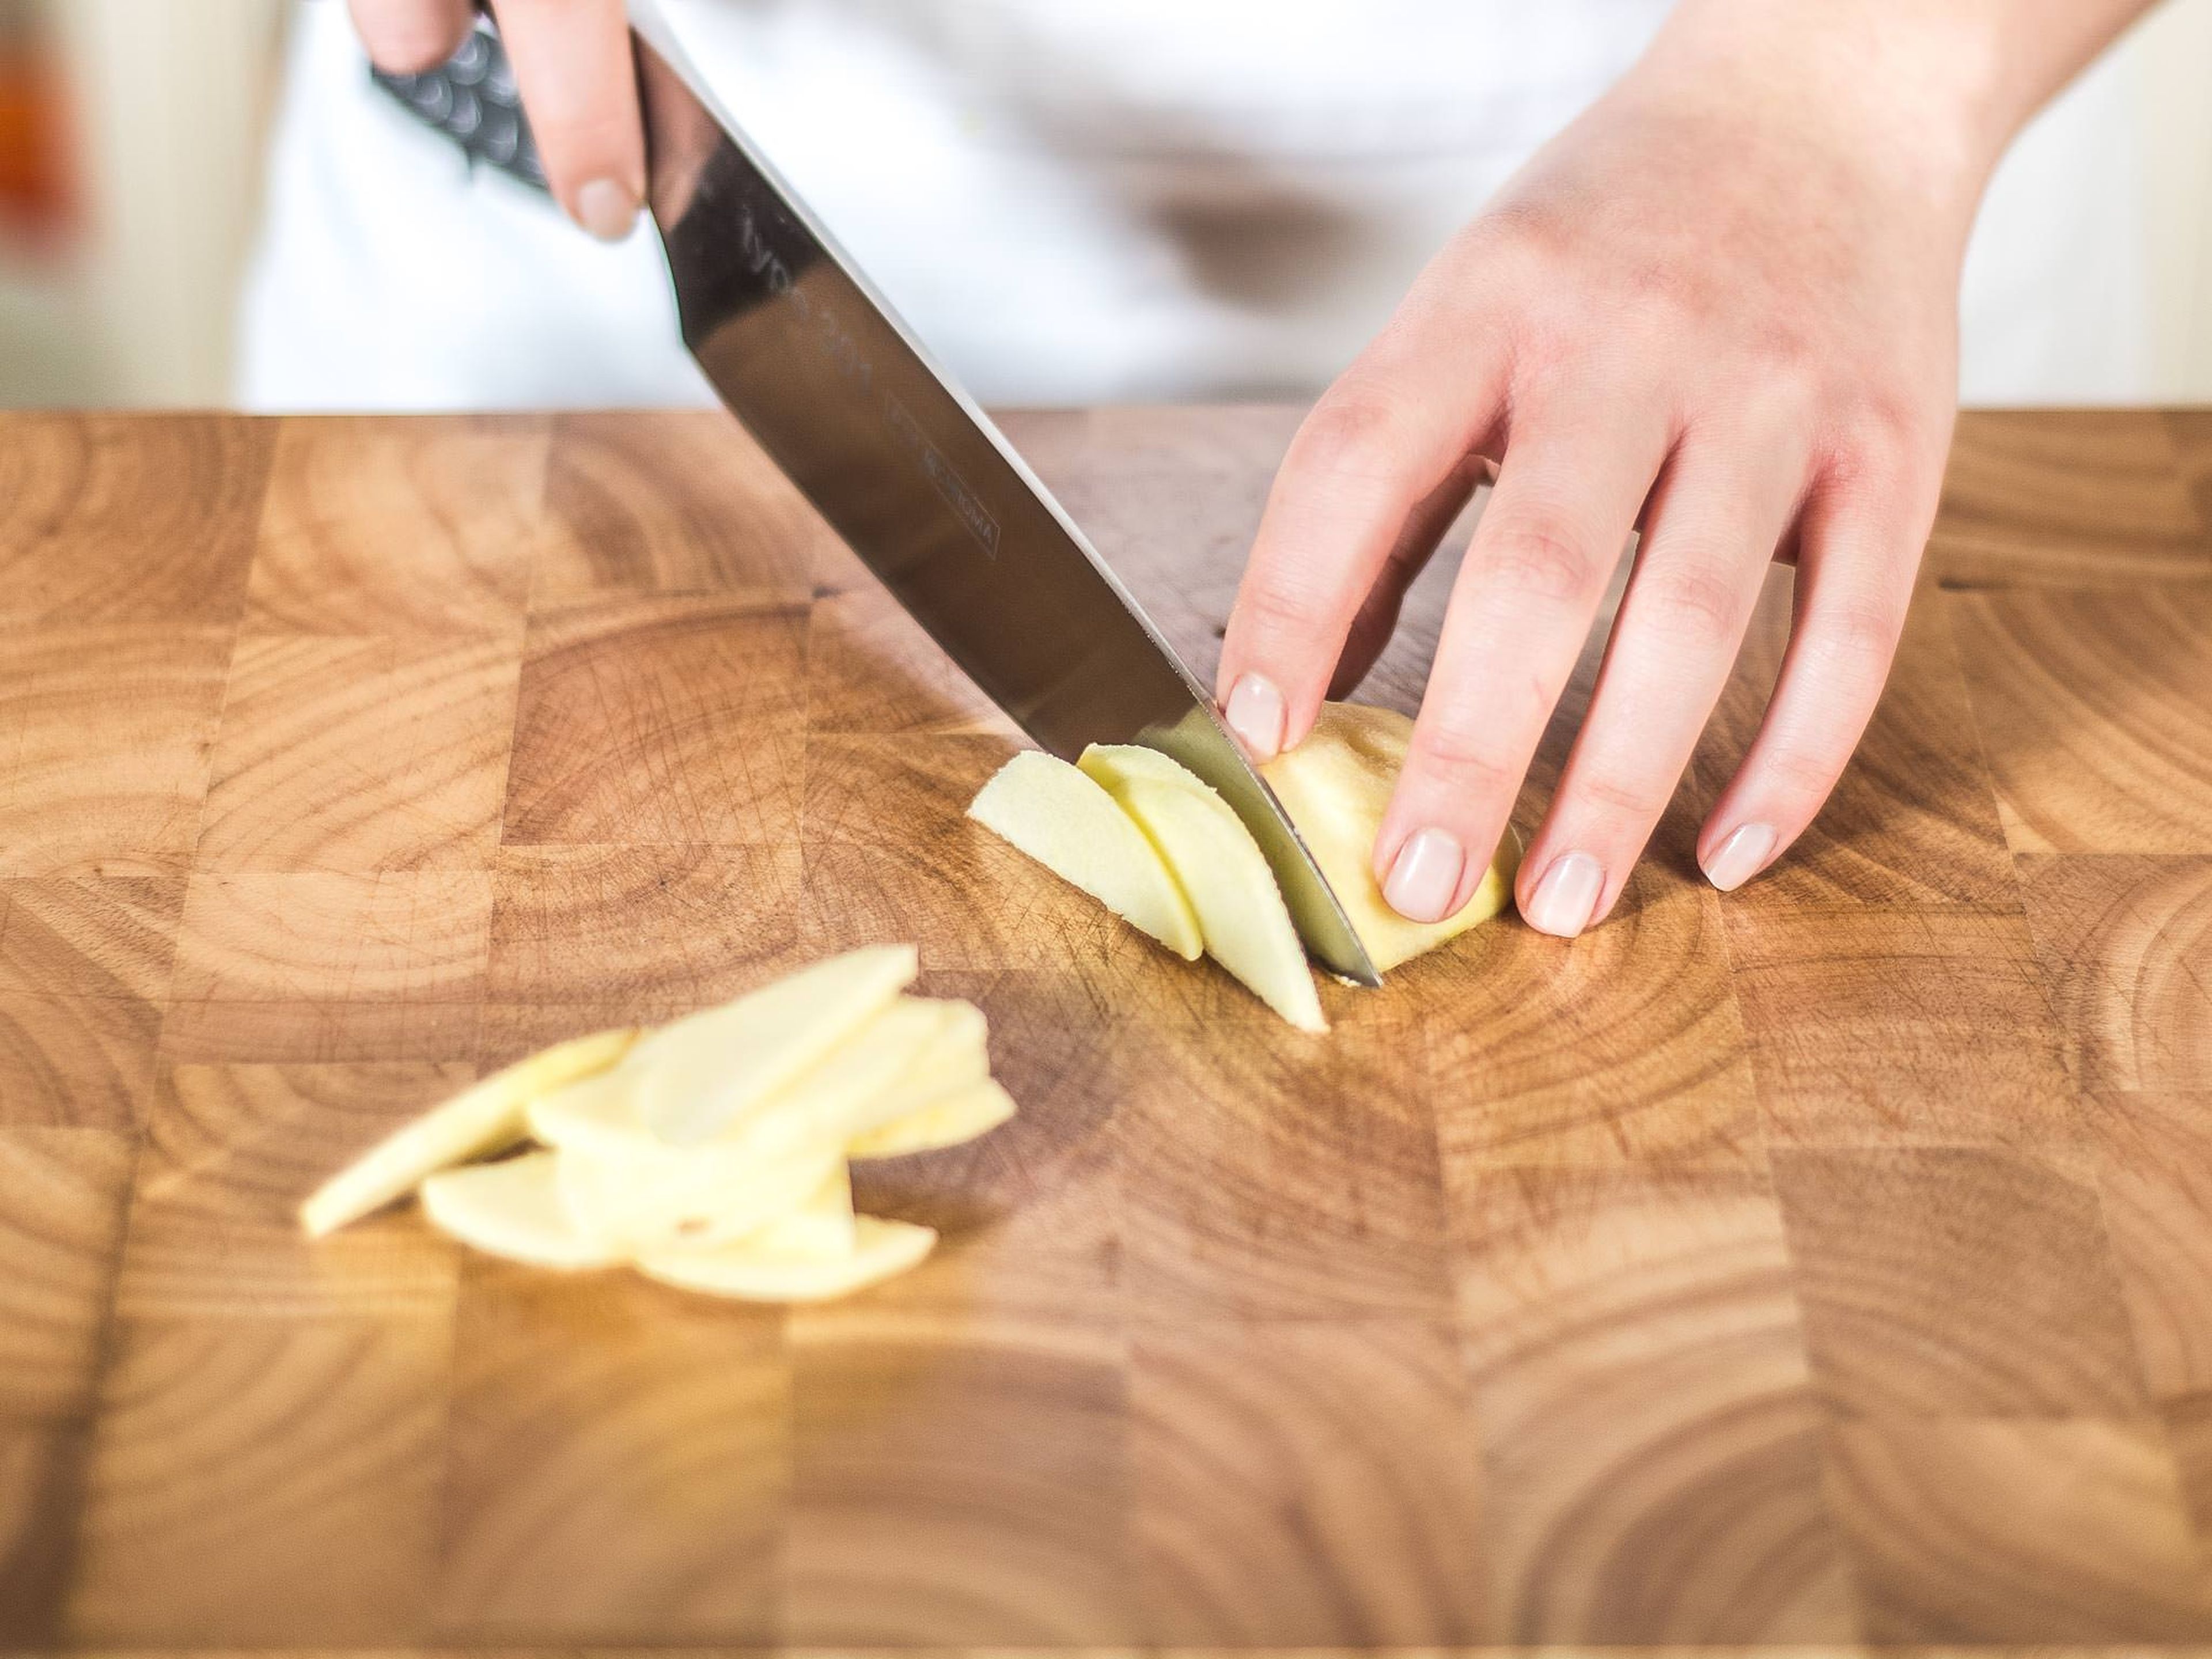 Preheat the oven to 180°C/ 350°F. Then, peel and core the apples, halve them lengthwise, and cut them into thin slices.